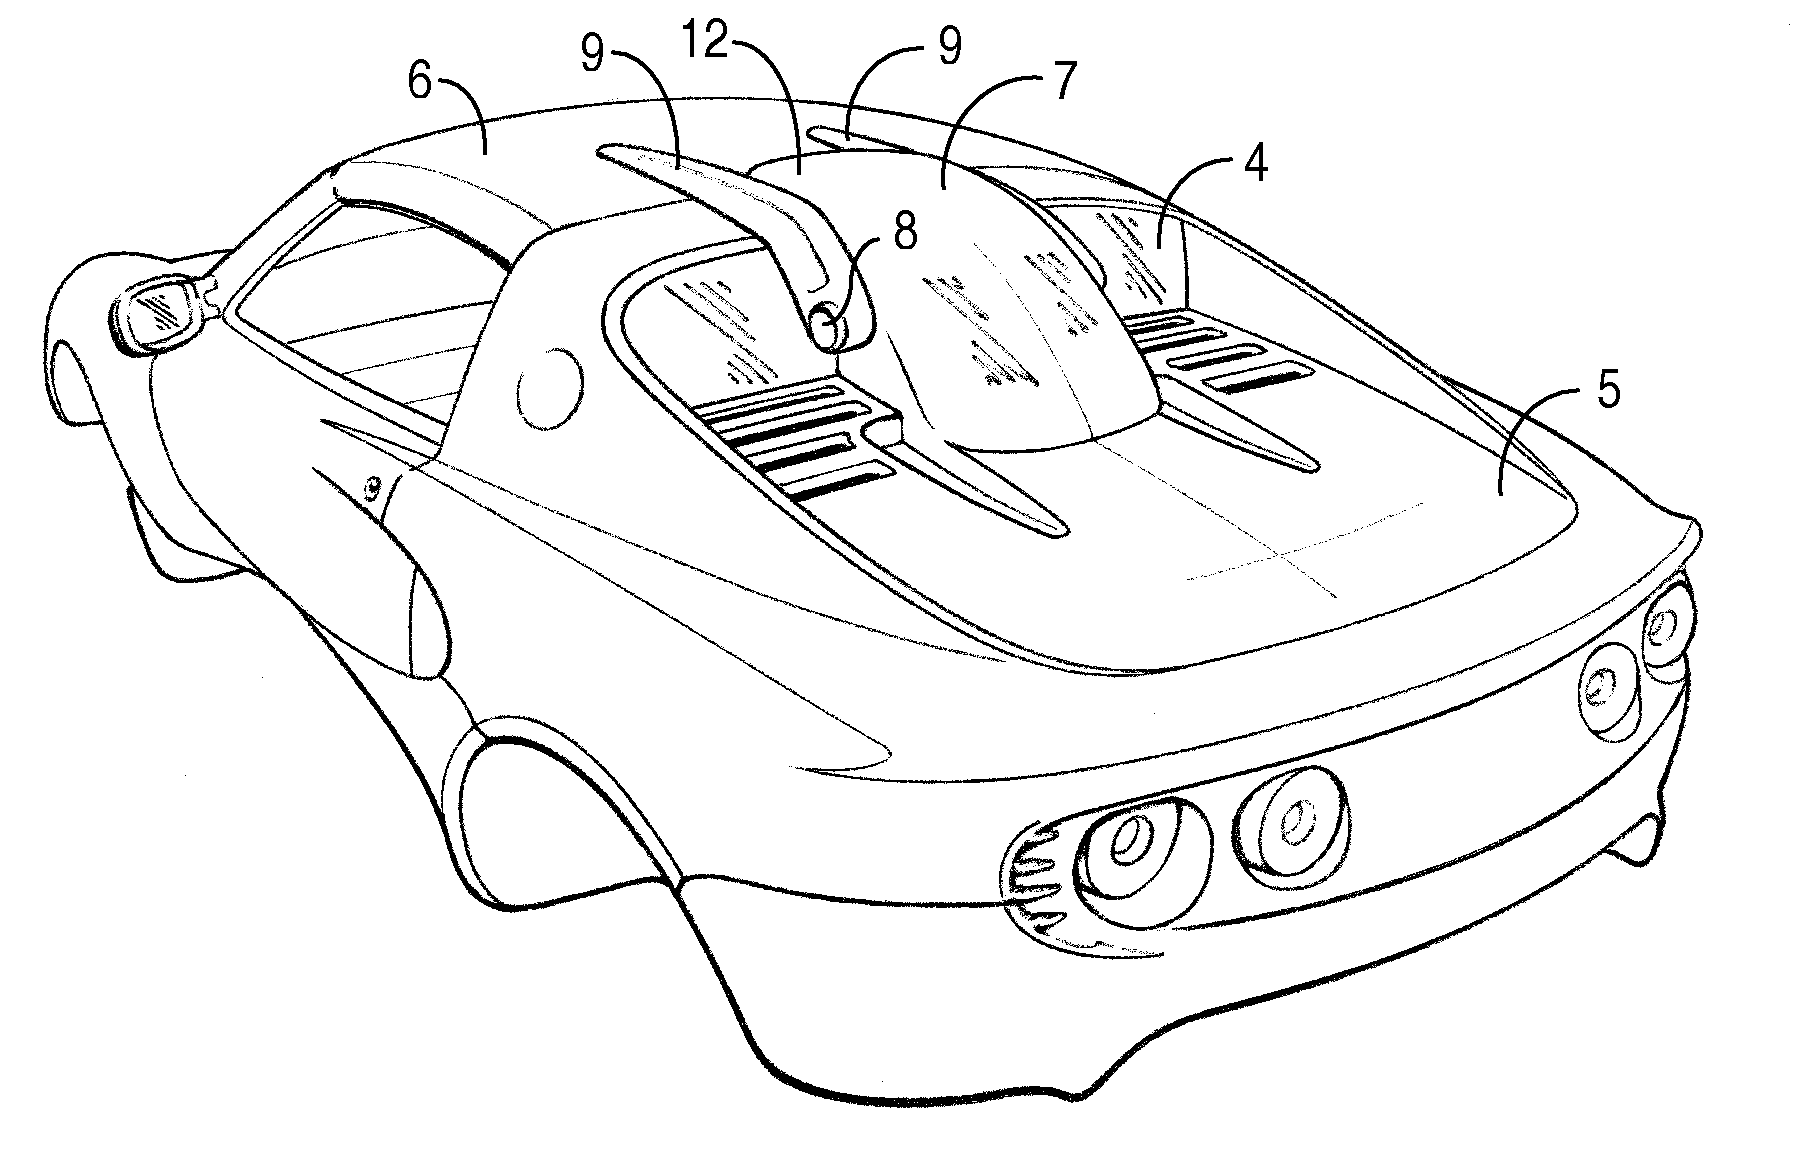 Targa roof system with a buttress